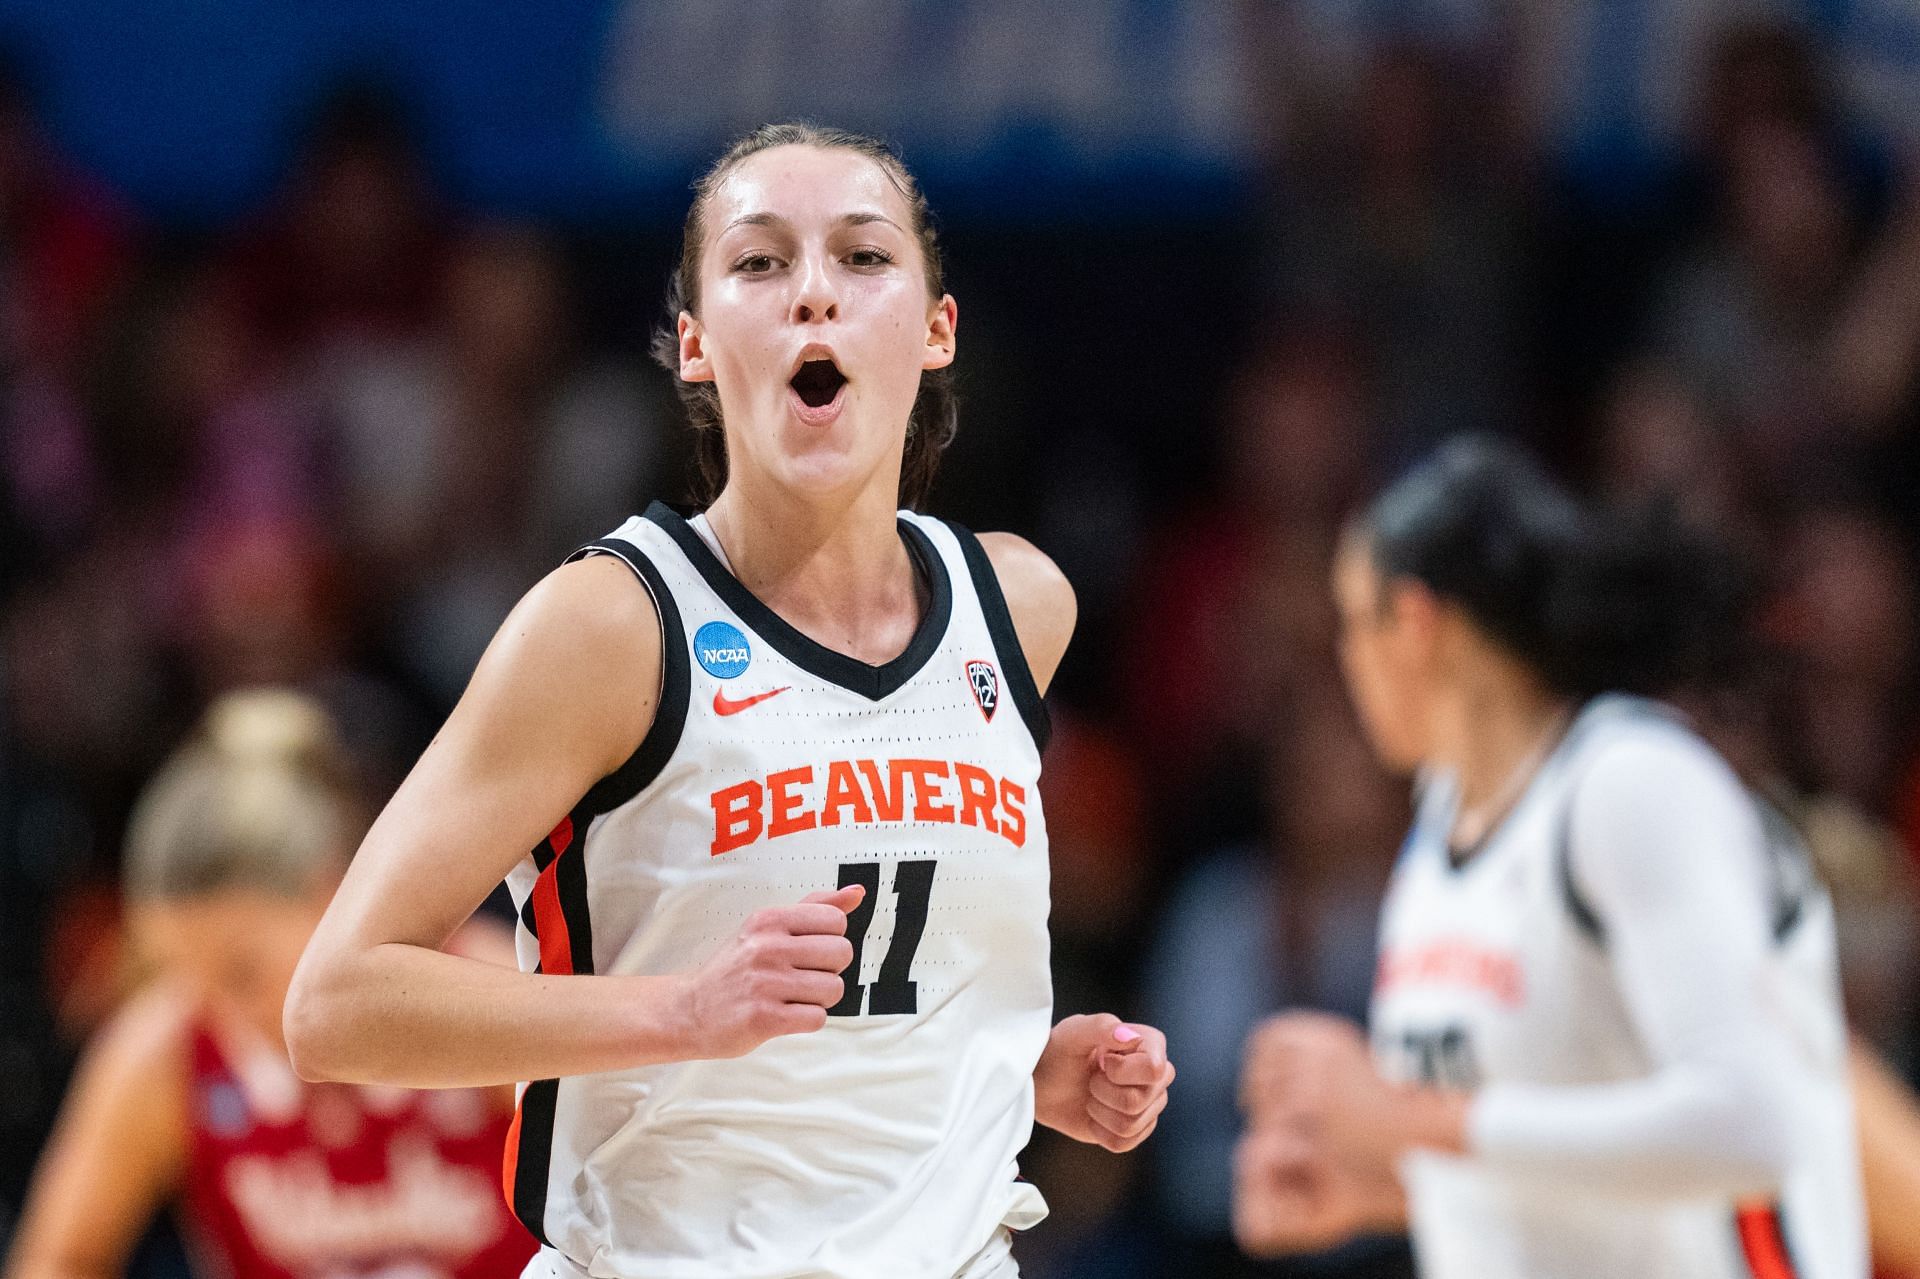 Oregon State could stay hot with a Sweet 16 upset of Notre Dame.